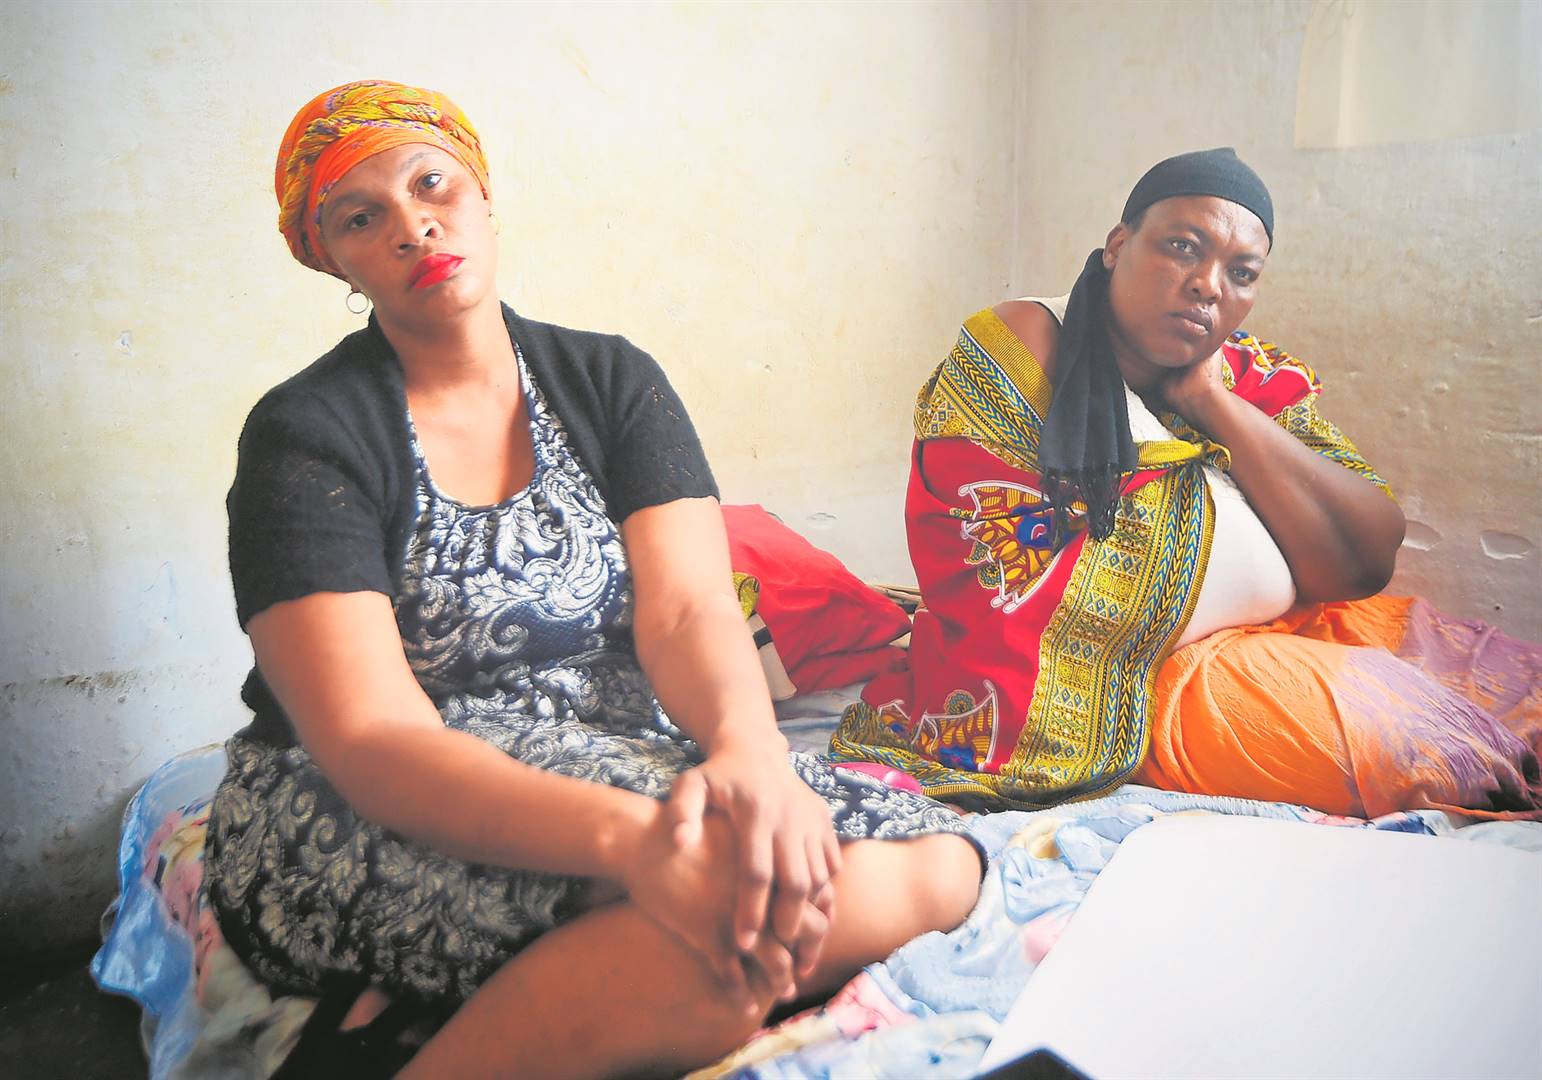 Nonhlanhla Cethe speaks about her late nephew Xolani Cethe, who drowned while trying to save a nine-year-old. With her is Xolani’s mum Phumzile Cethe.    Photo by Lucky Morajane